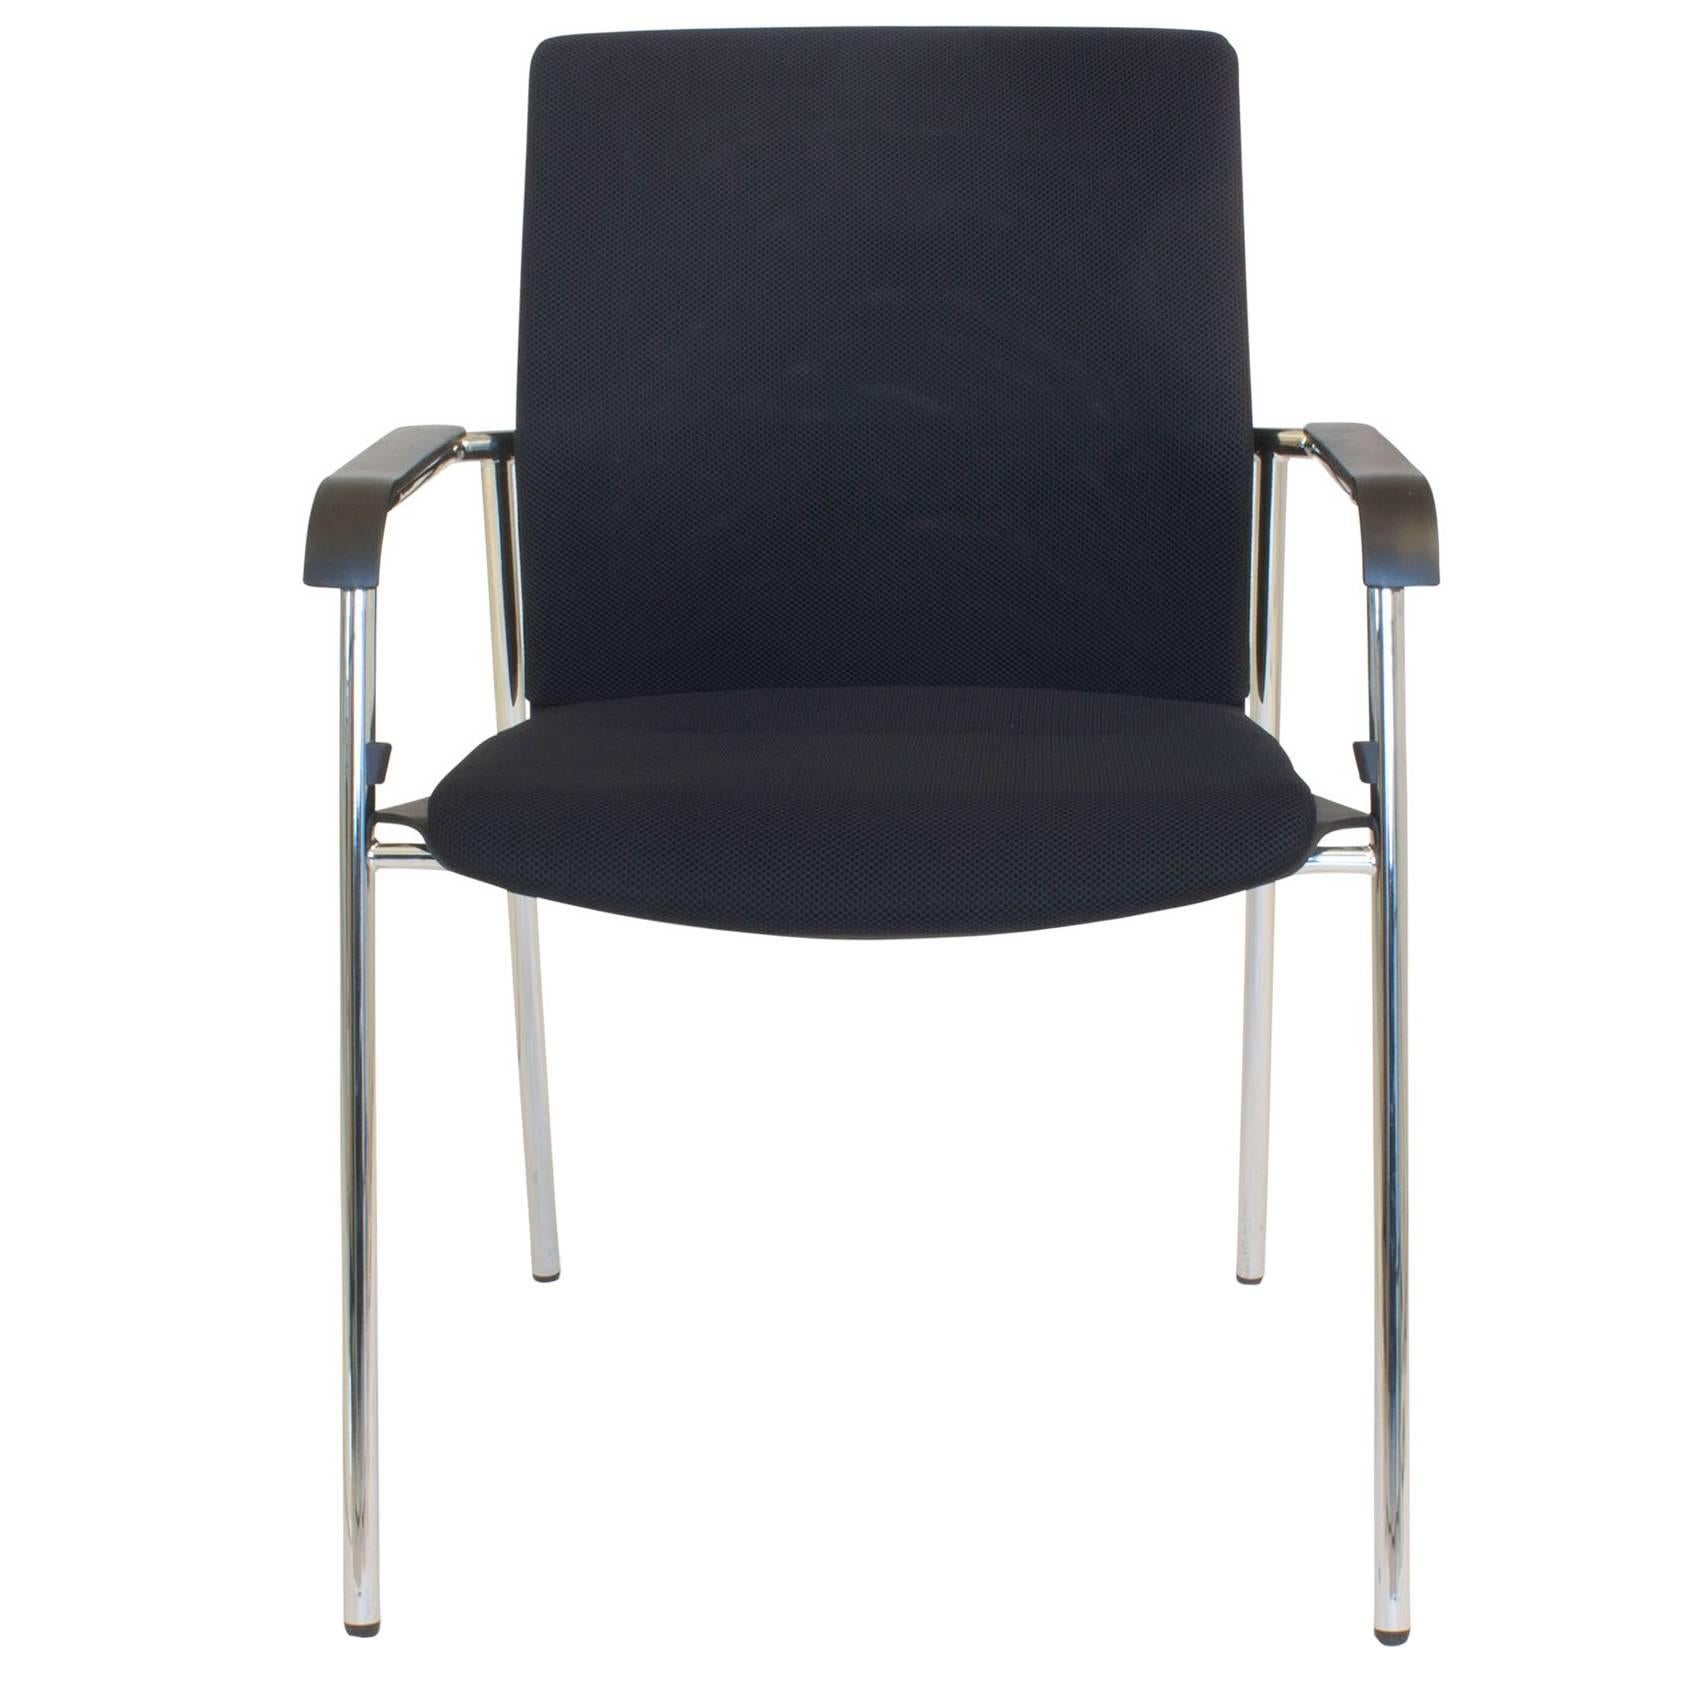 Chrome and Mesh Fabric on 176/7 Chair by Wiege for Wilkhahn, Germany For Sale